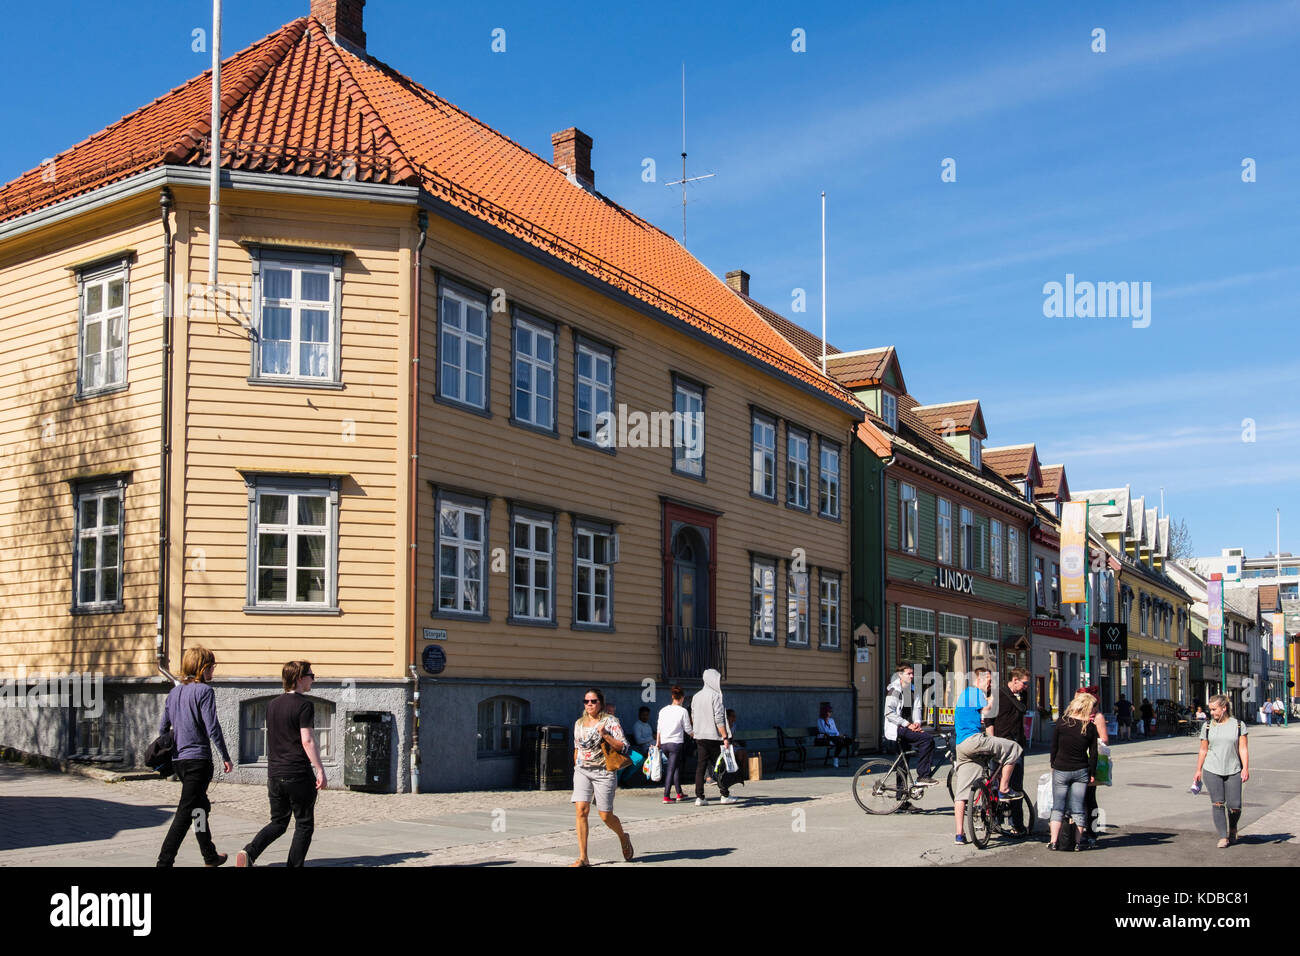 Street scene with people outside Bishops' House in traditional wooden building in old city centre in summer. Storgata, Tromso, Troms county, Norway Stock Photo